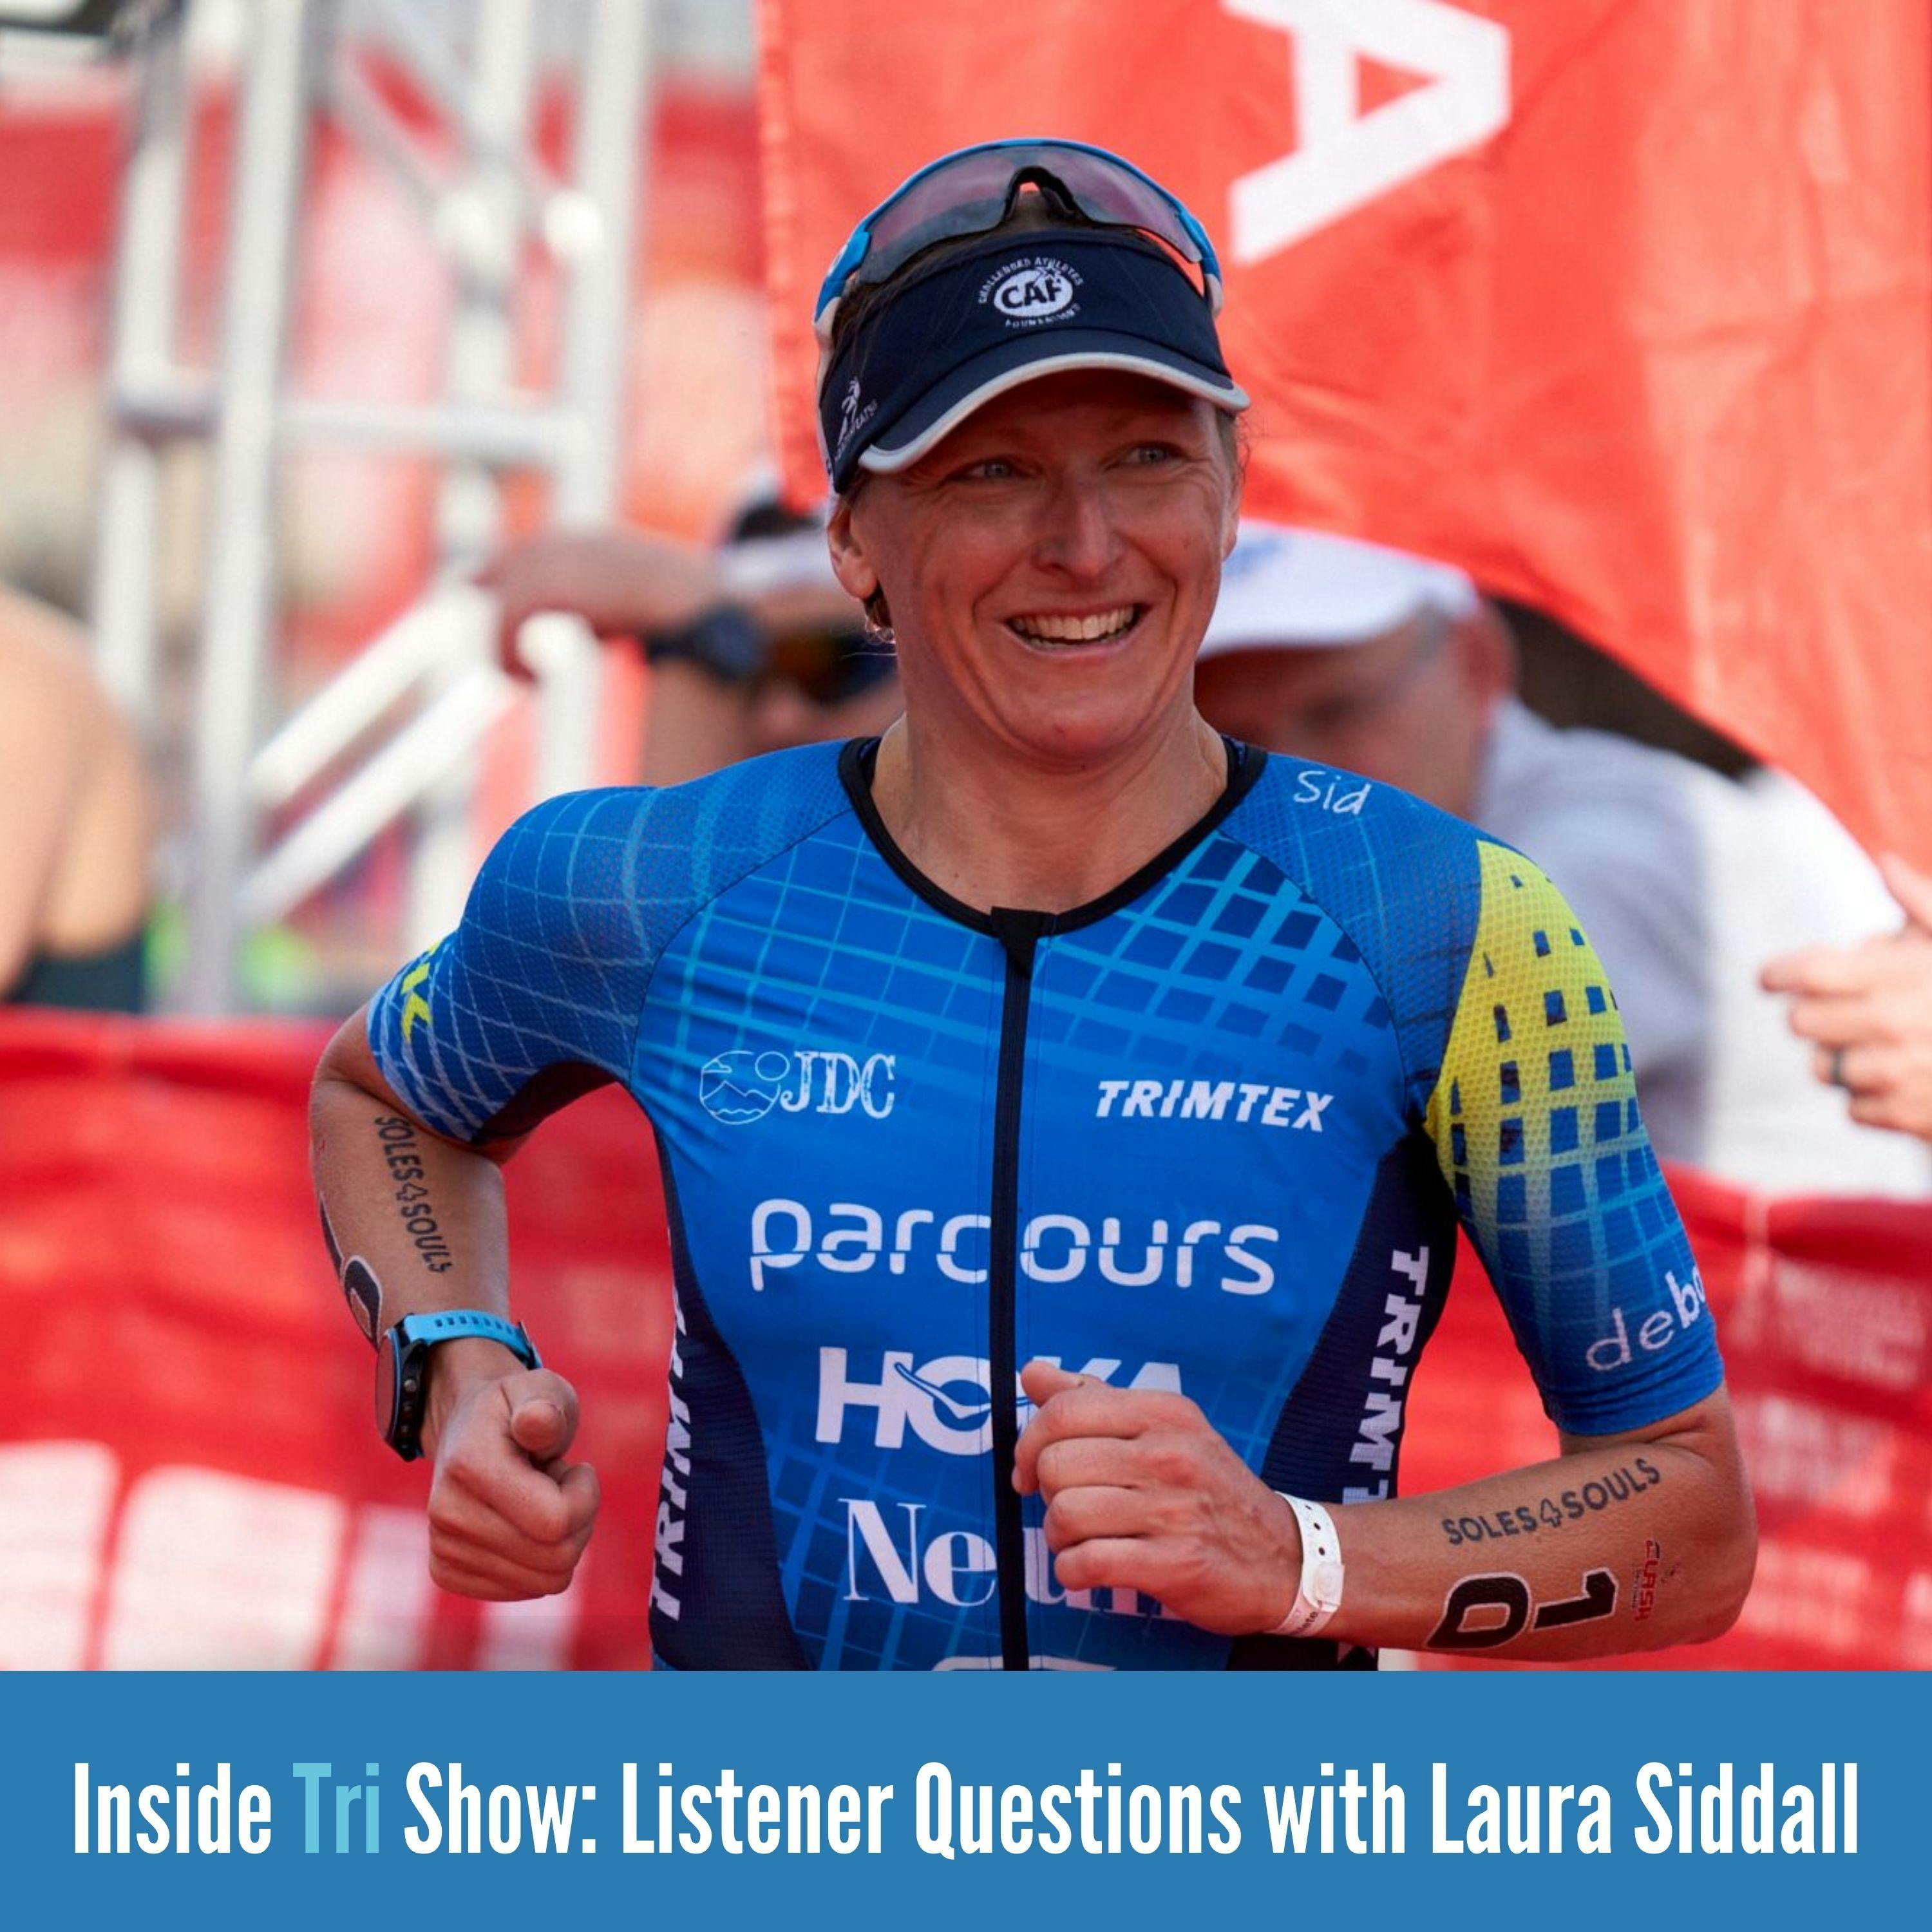 Listener Questions and emails with Laura Siddall